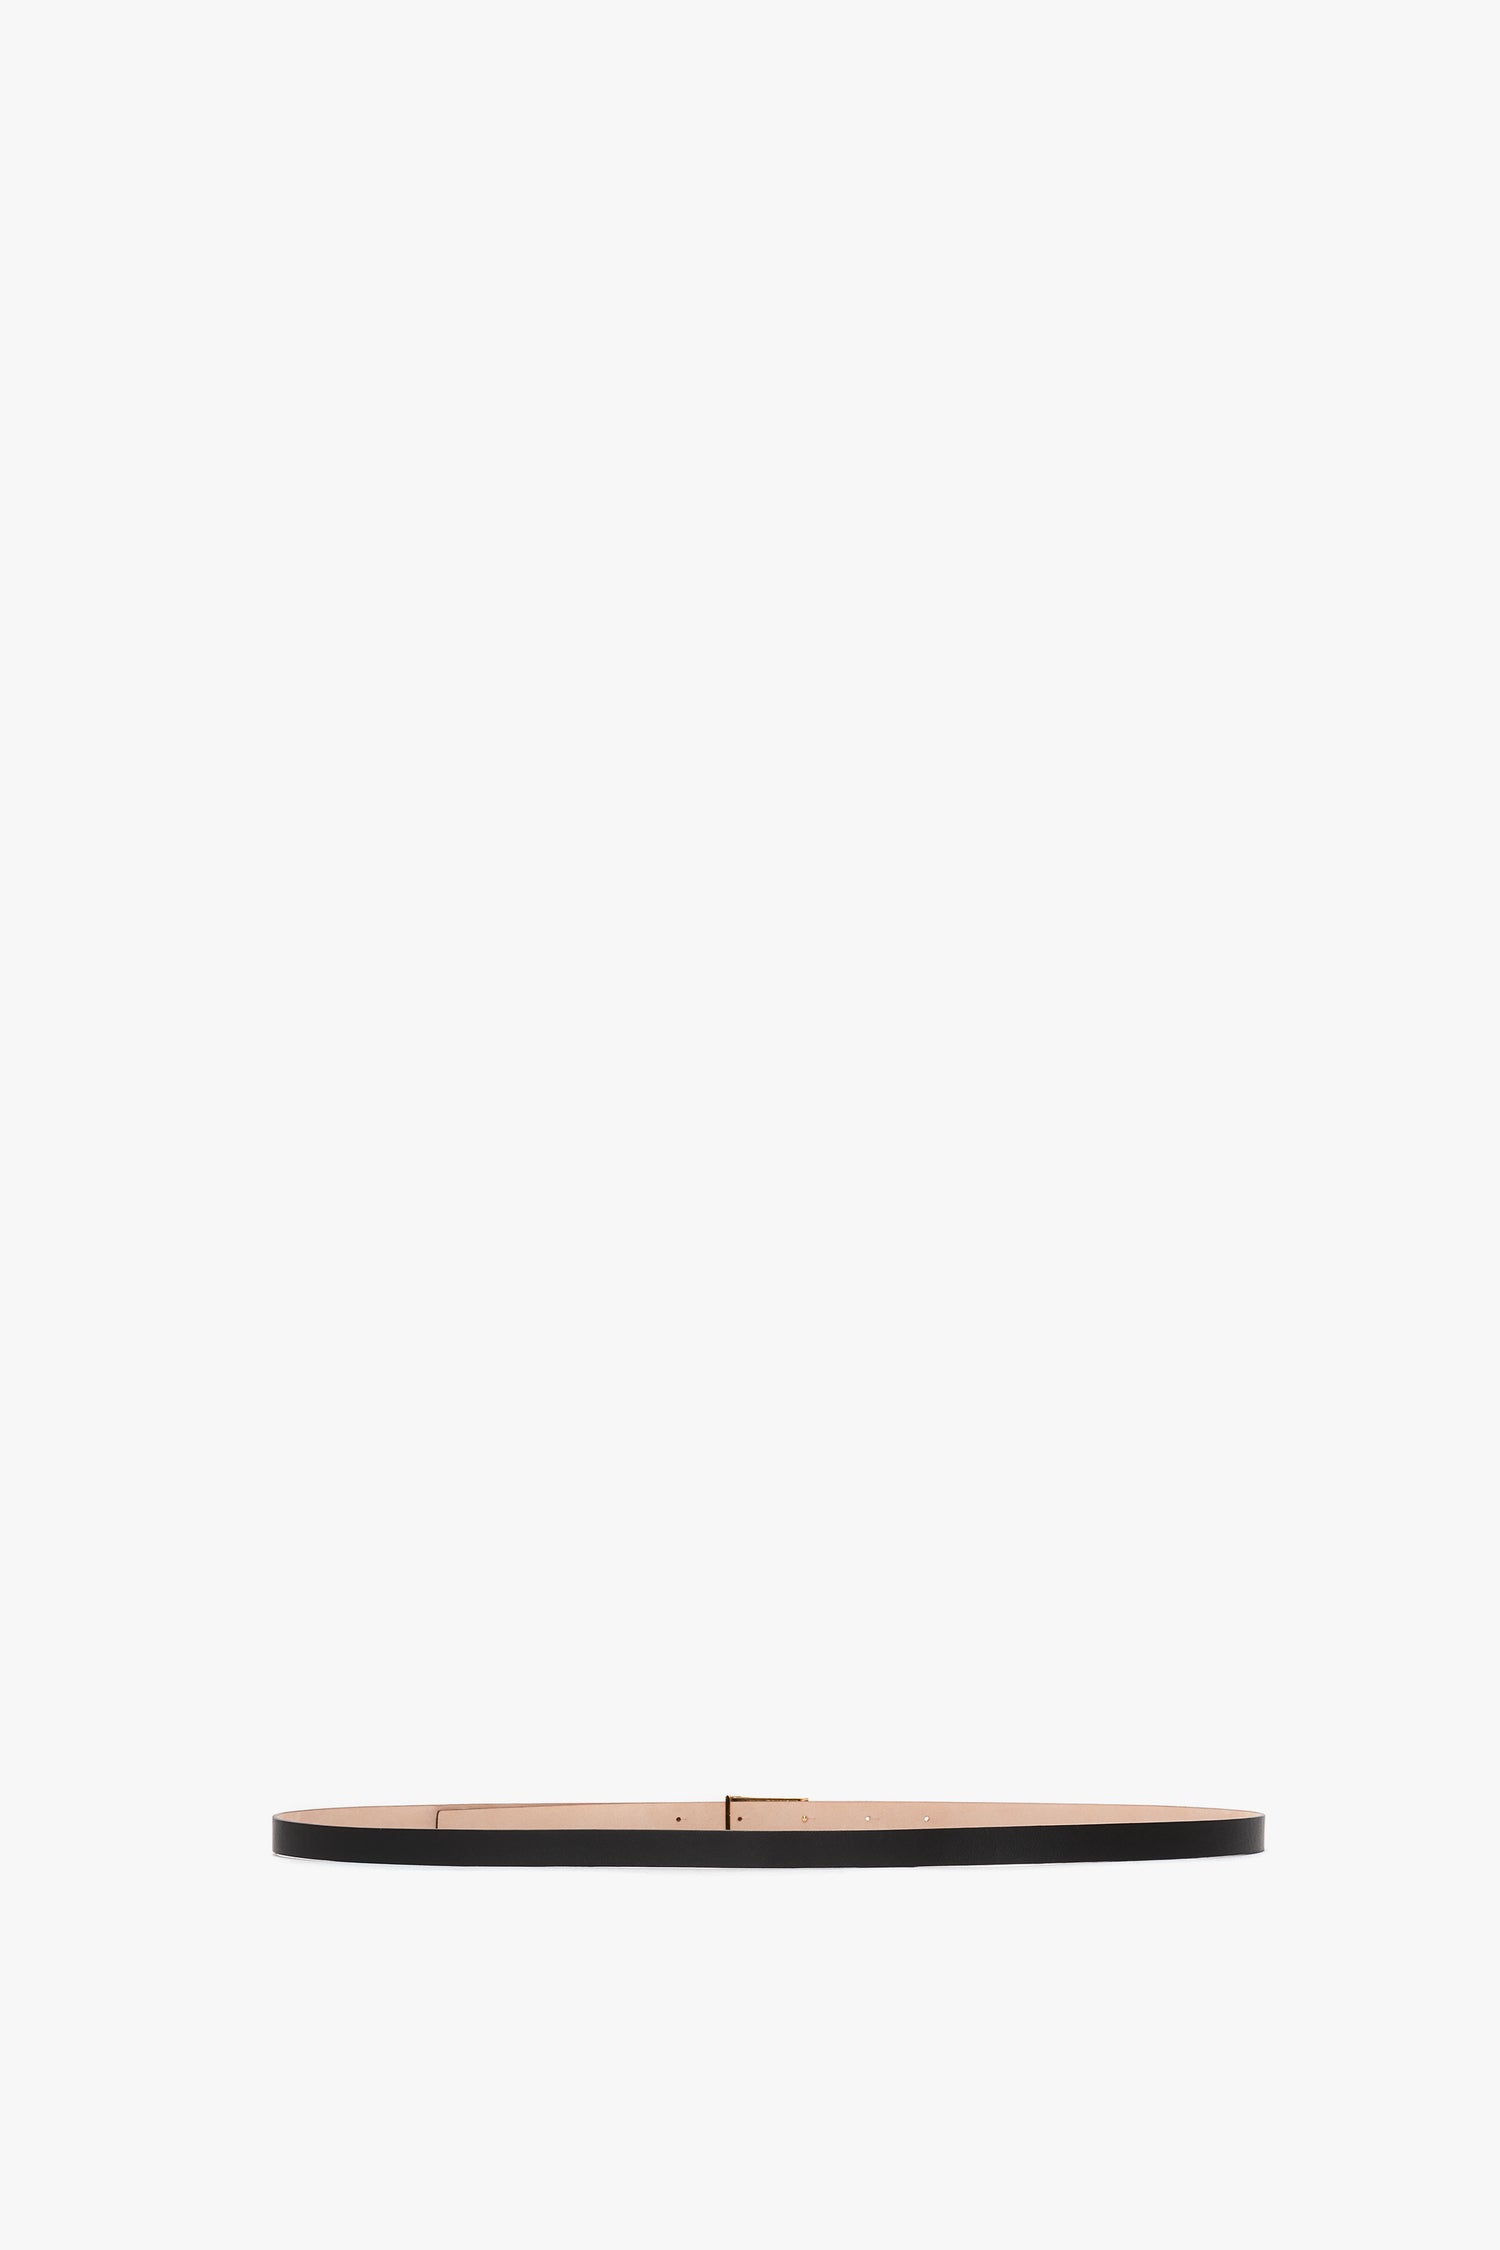 A minimalist image of an Exclusive Victoria Beckham Micro Frame Belt in Black Leather with small gold hardware, centered against a plain white background.